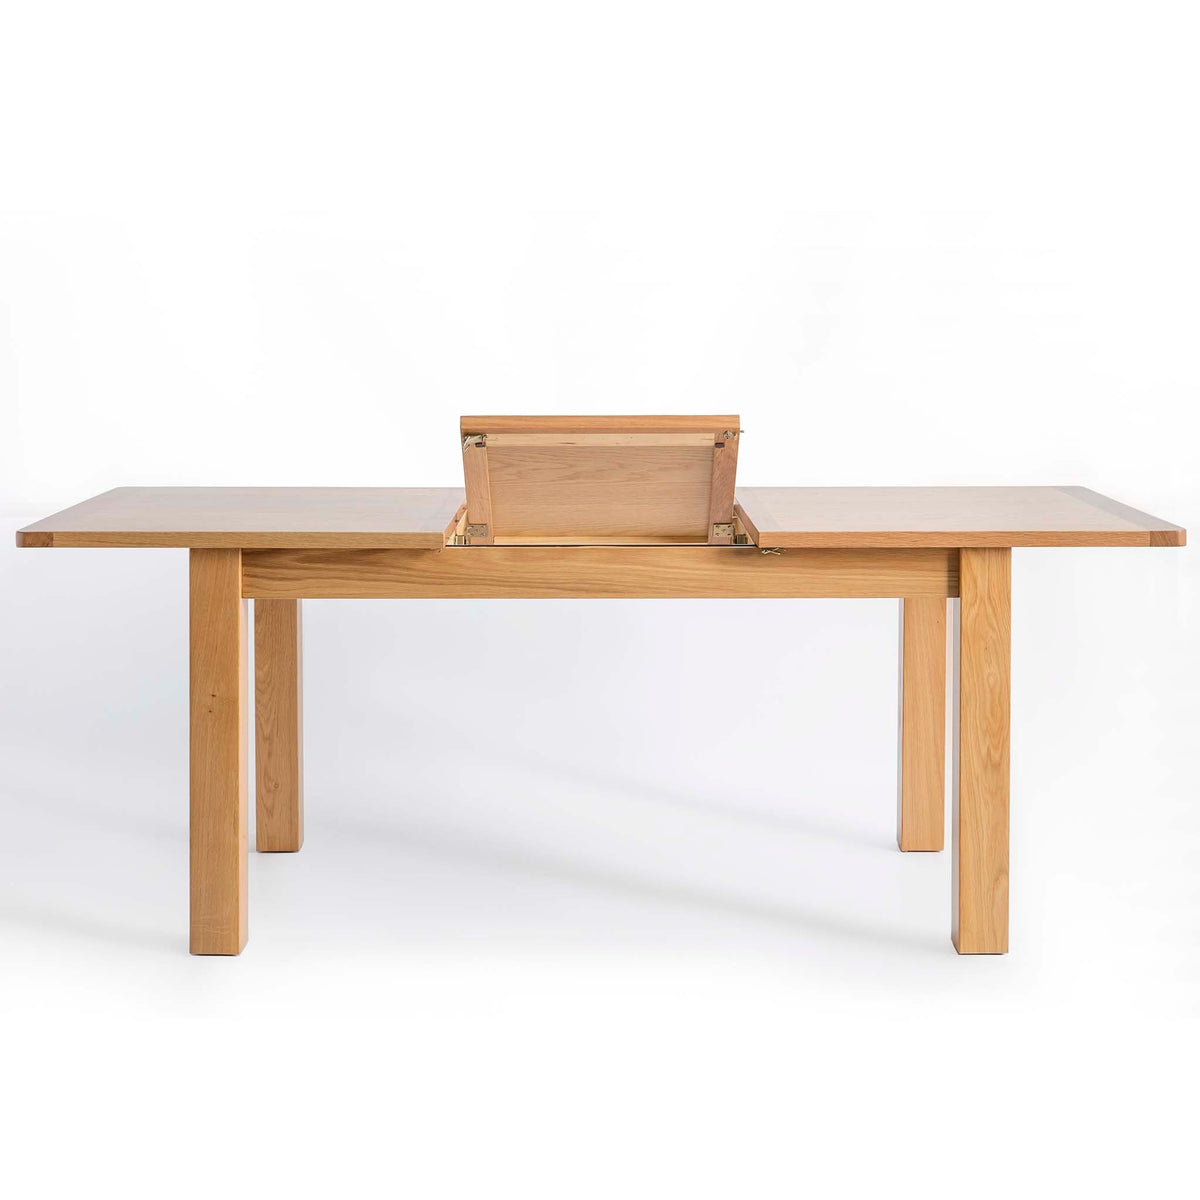 Hampshire Oak Small Extending Dining Table - Opening Sequence